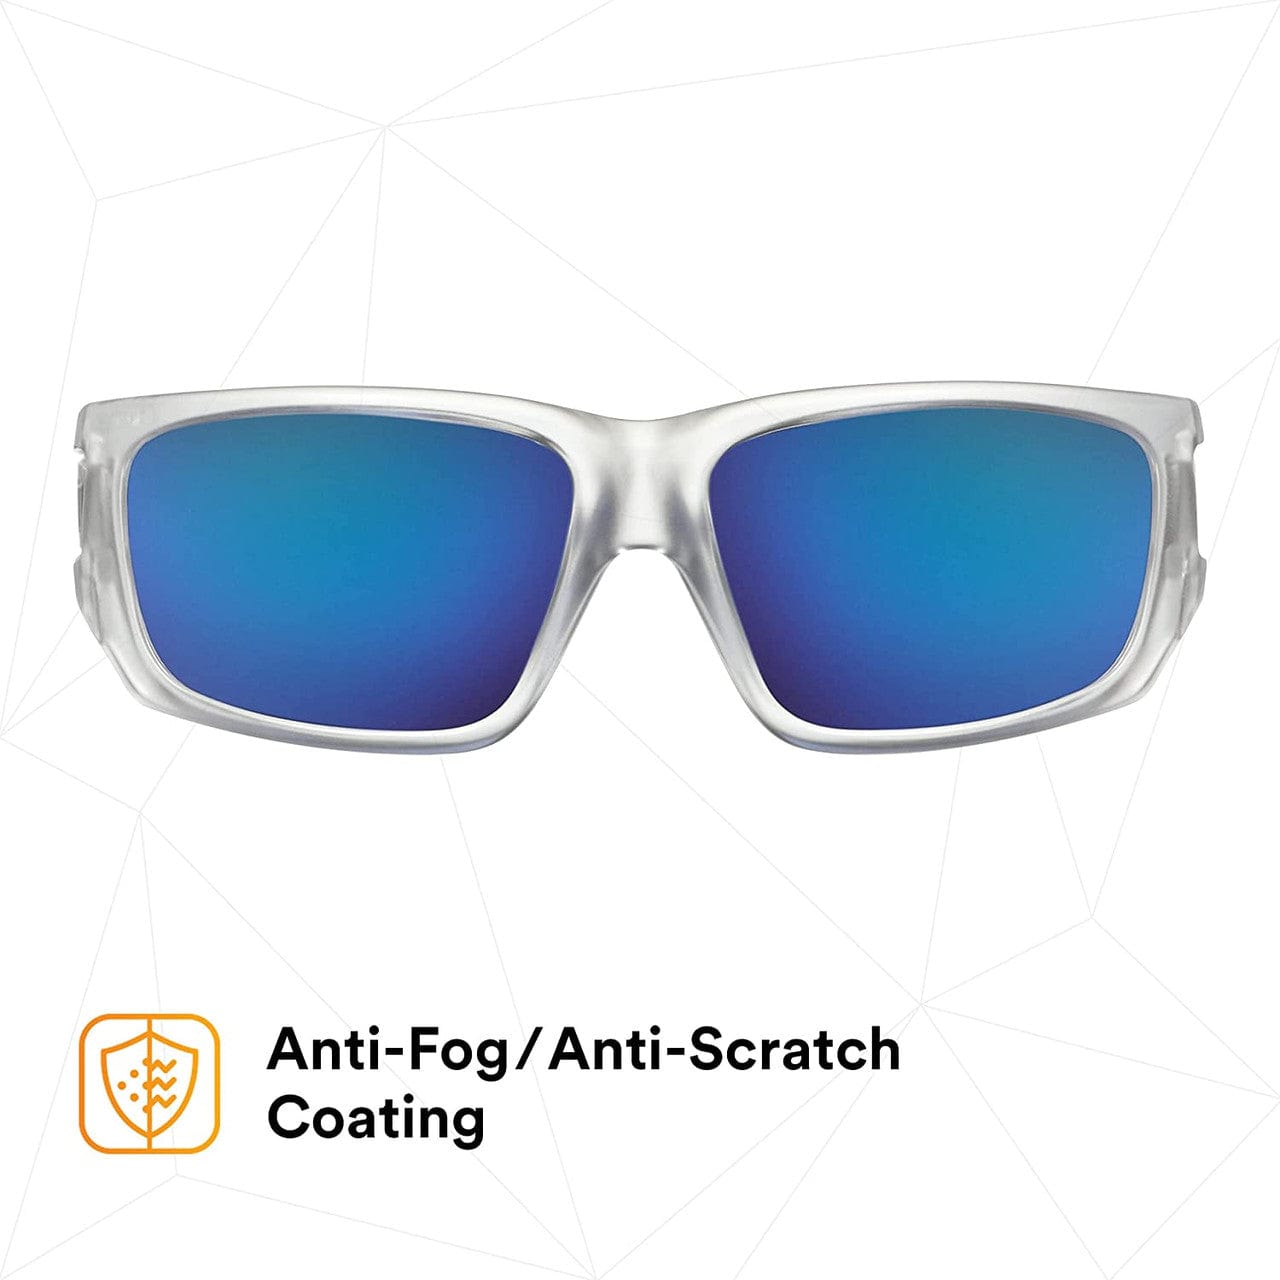 3M Maxim Elite 1000 Safety Glasses with Clear Frame and and Blue Mirror Anti-Fog Lens